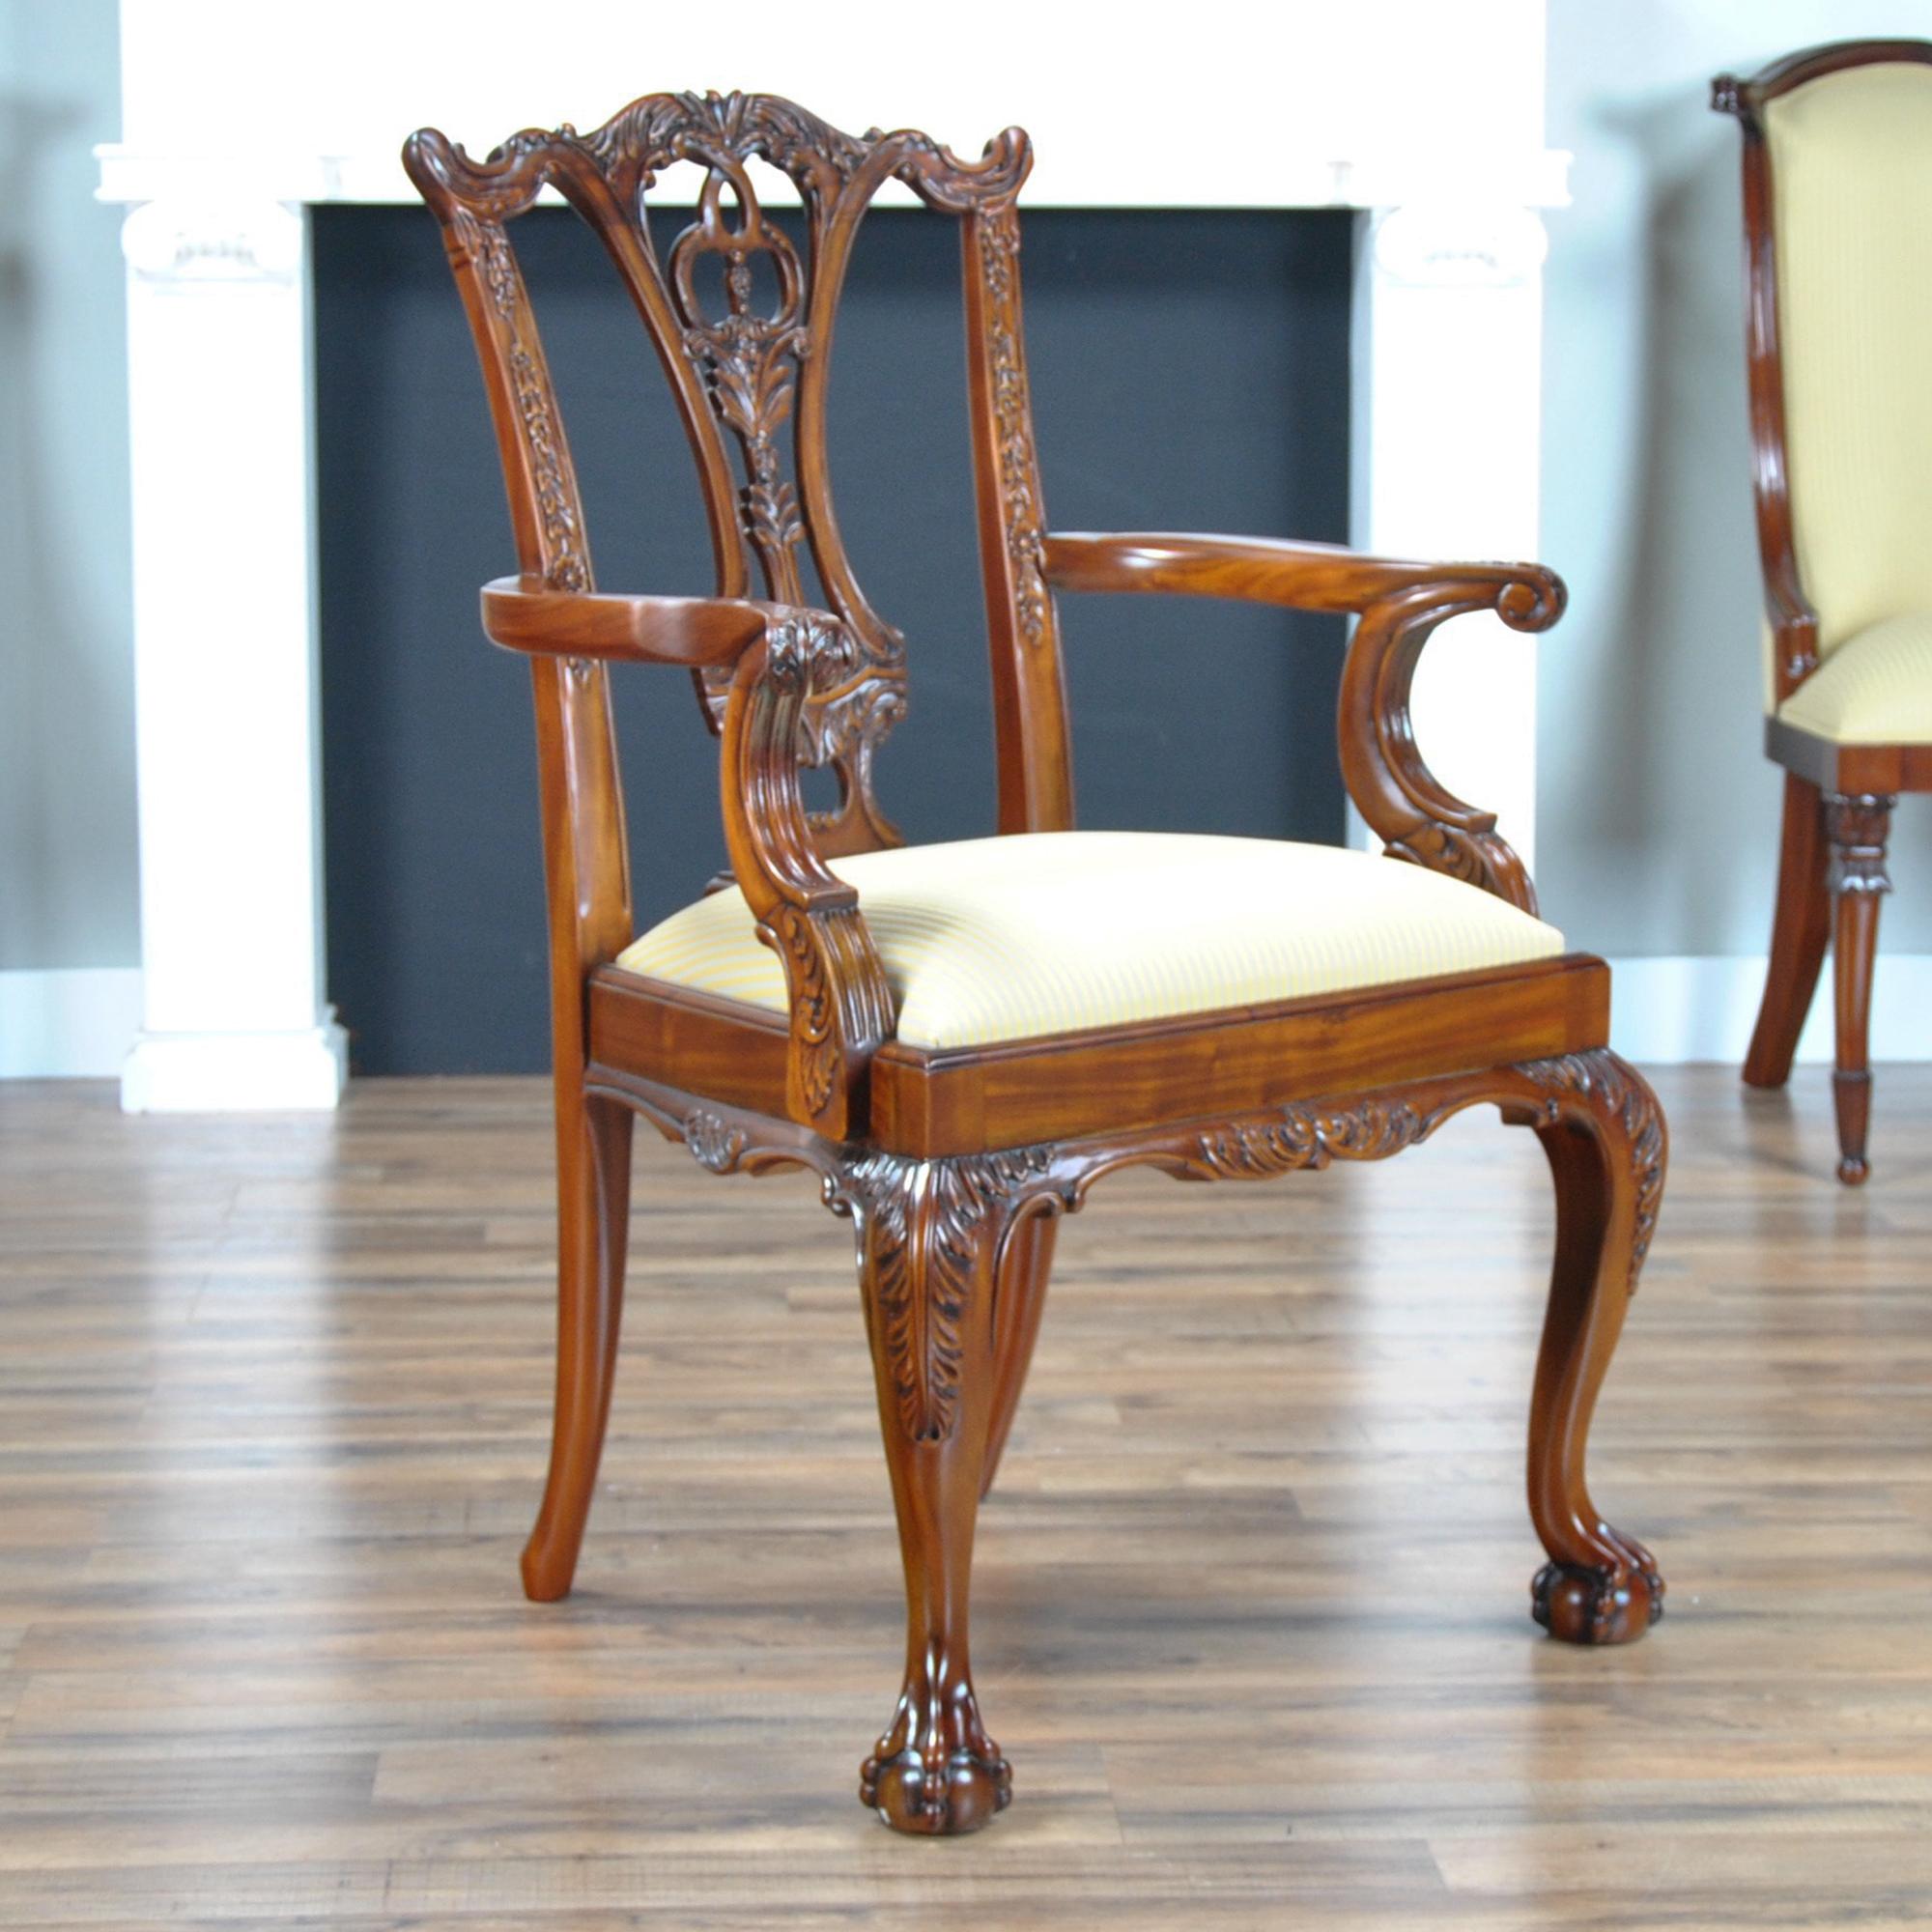 This set of ten Standard Chippendale Chairs has sold so well over the years that it has become known at our shop as the set of “Standard Chippendale Chairs”. A carved crest rail, foliate carved back splat, and legs featuring acanthus carvings as